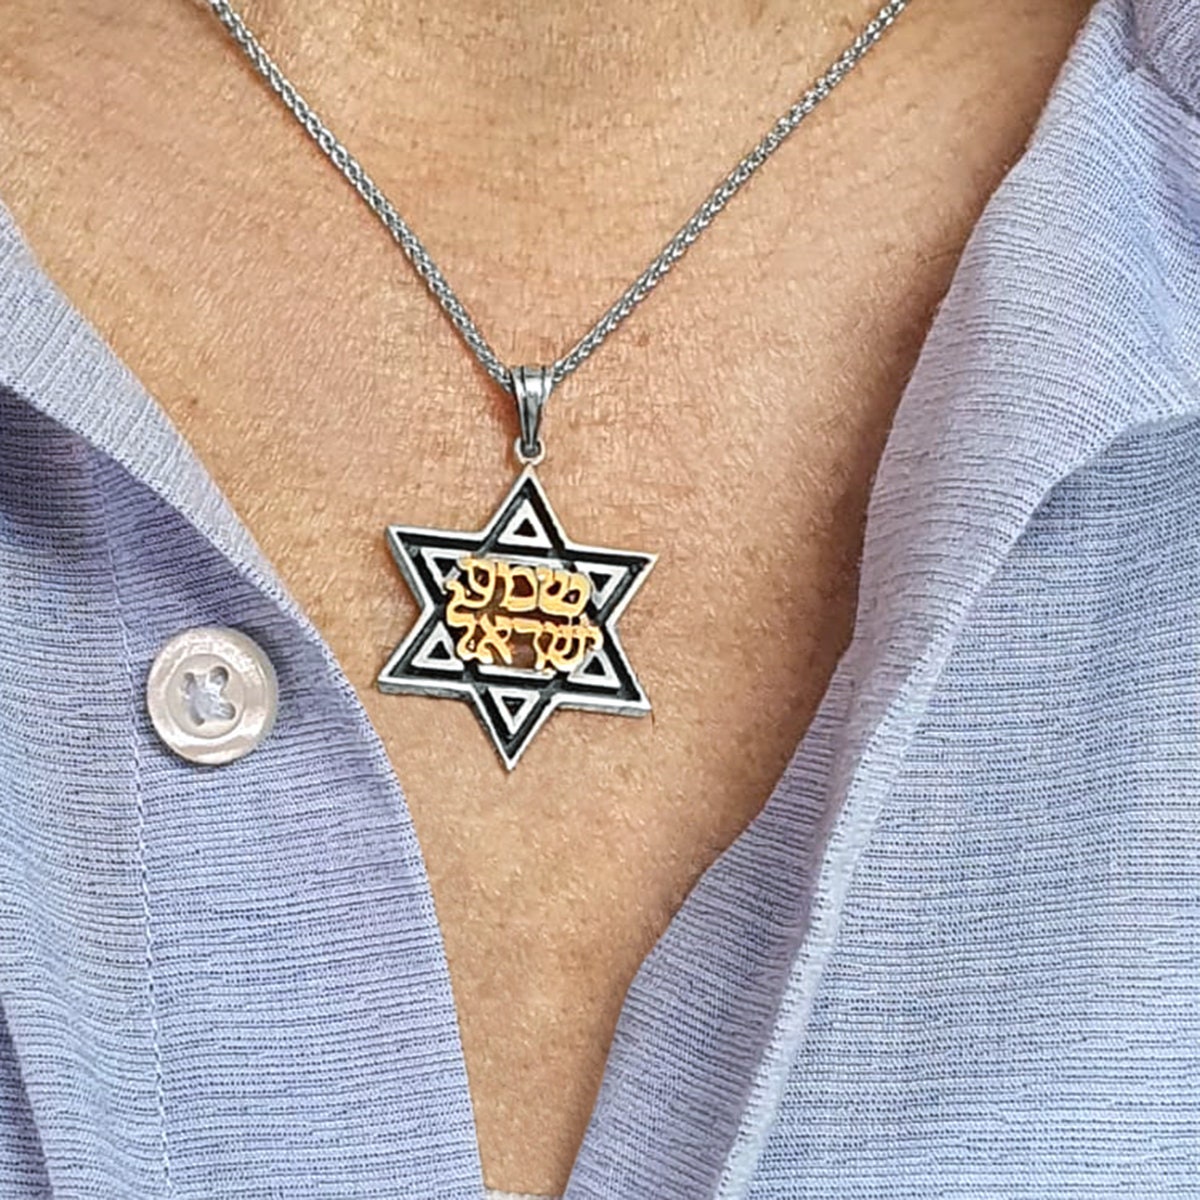 Tradition Hebrew Necklace, Shema Israel Pendant, Dog Tags for Men, Jewish  Jewelry, Verses Torah,army Necklace,silver Star of David Necklace 